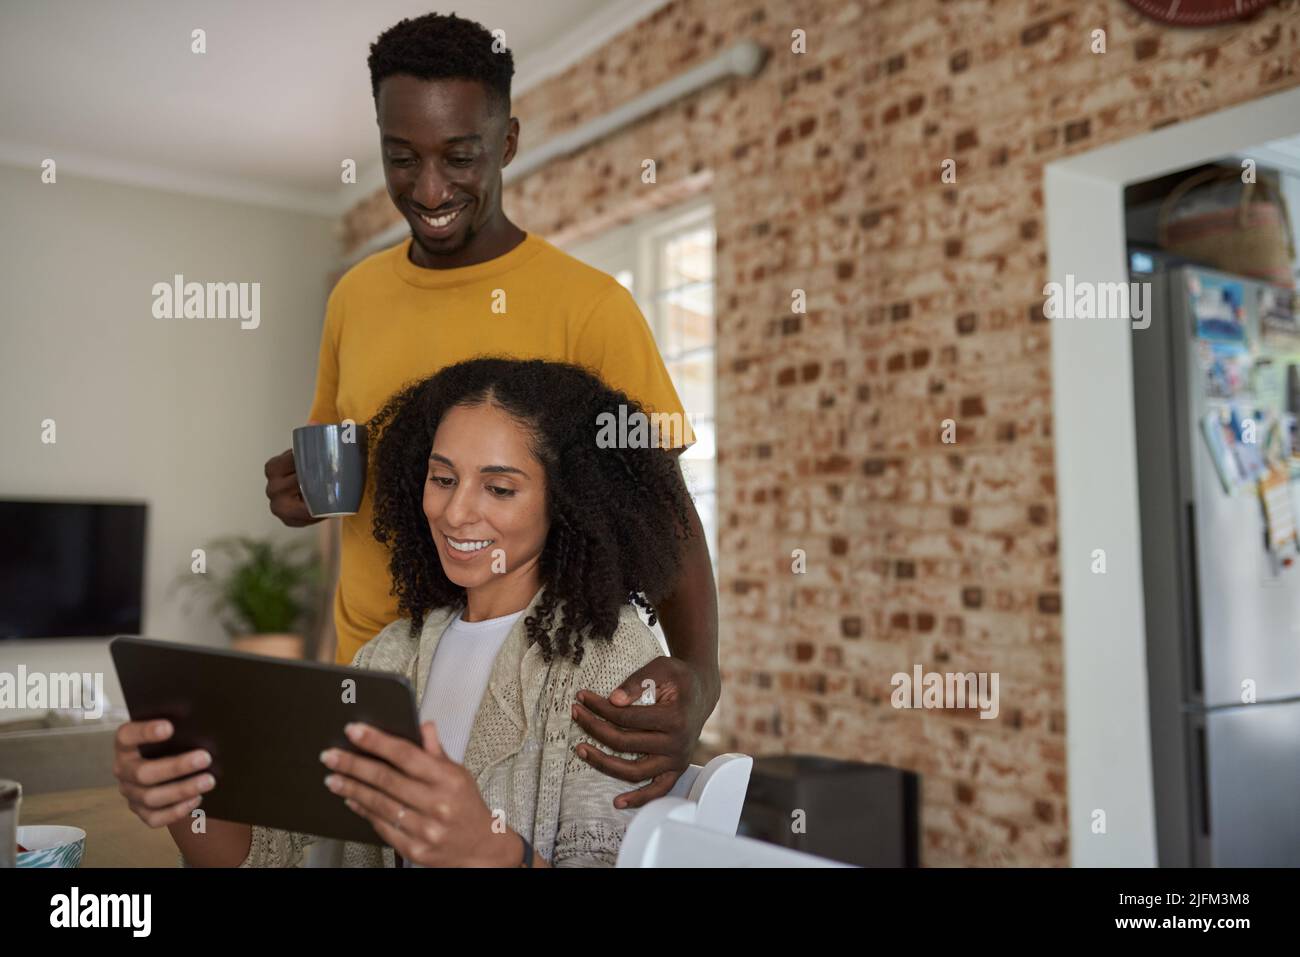 Smiling young multiethnic couple using a tablet together at home Stock Photo